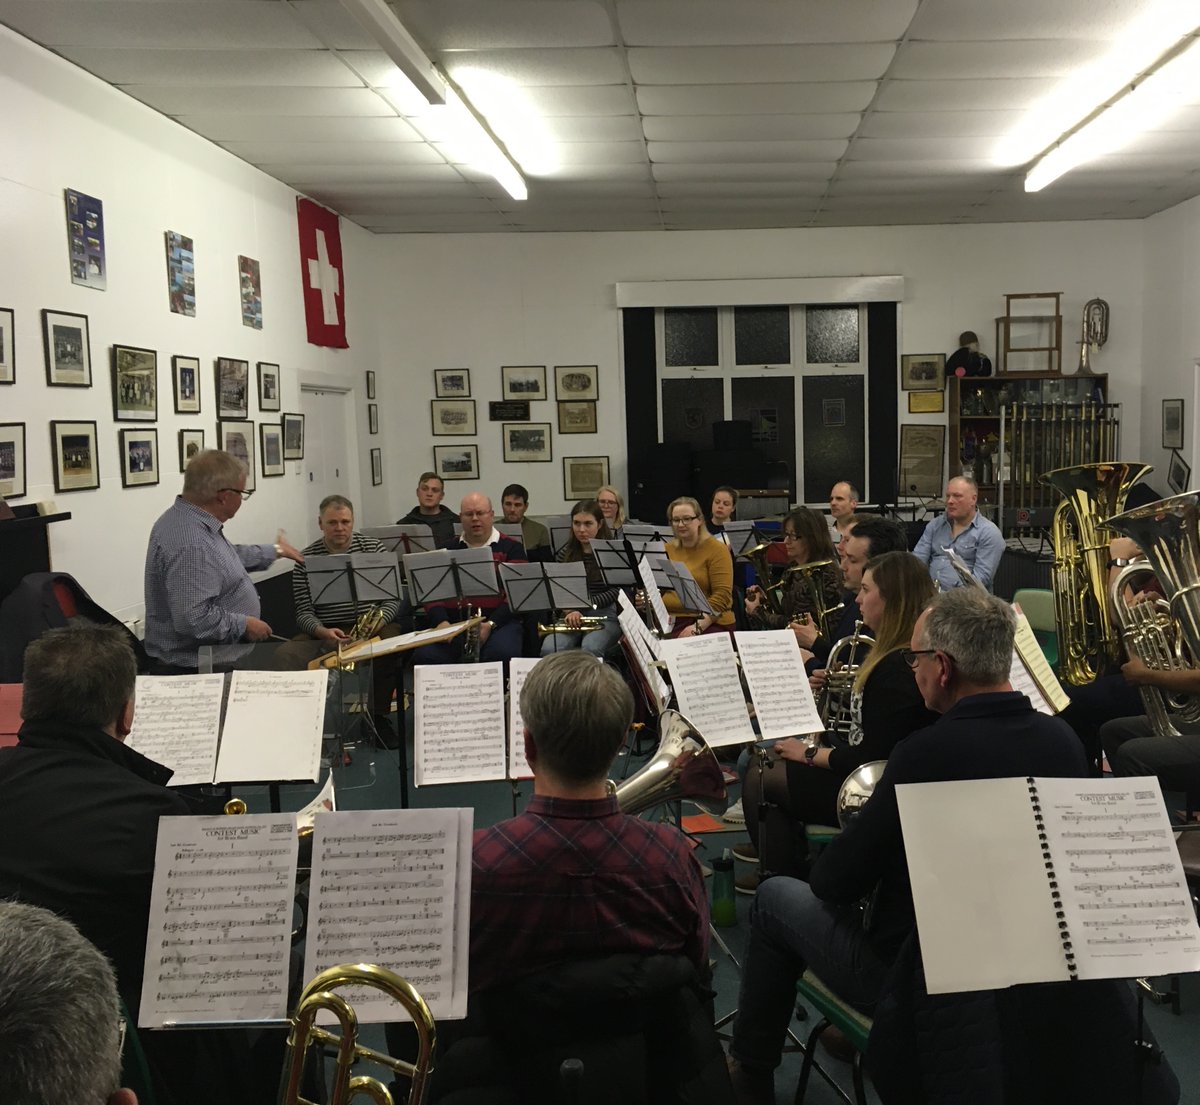 Yesterday evening we enjoyed a fantastic first rehearsal with Gary Cutt on Wilfred Heaton's 'Contest Music' ahead of the area contest in Cheltenham. It is a busy week for the band with sectionals this weekend followed by a concert in the wonderful @romseyabbey next Saturday! 🎺